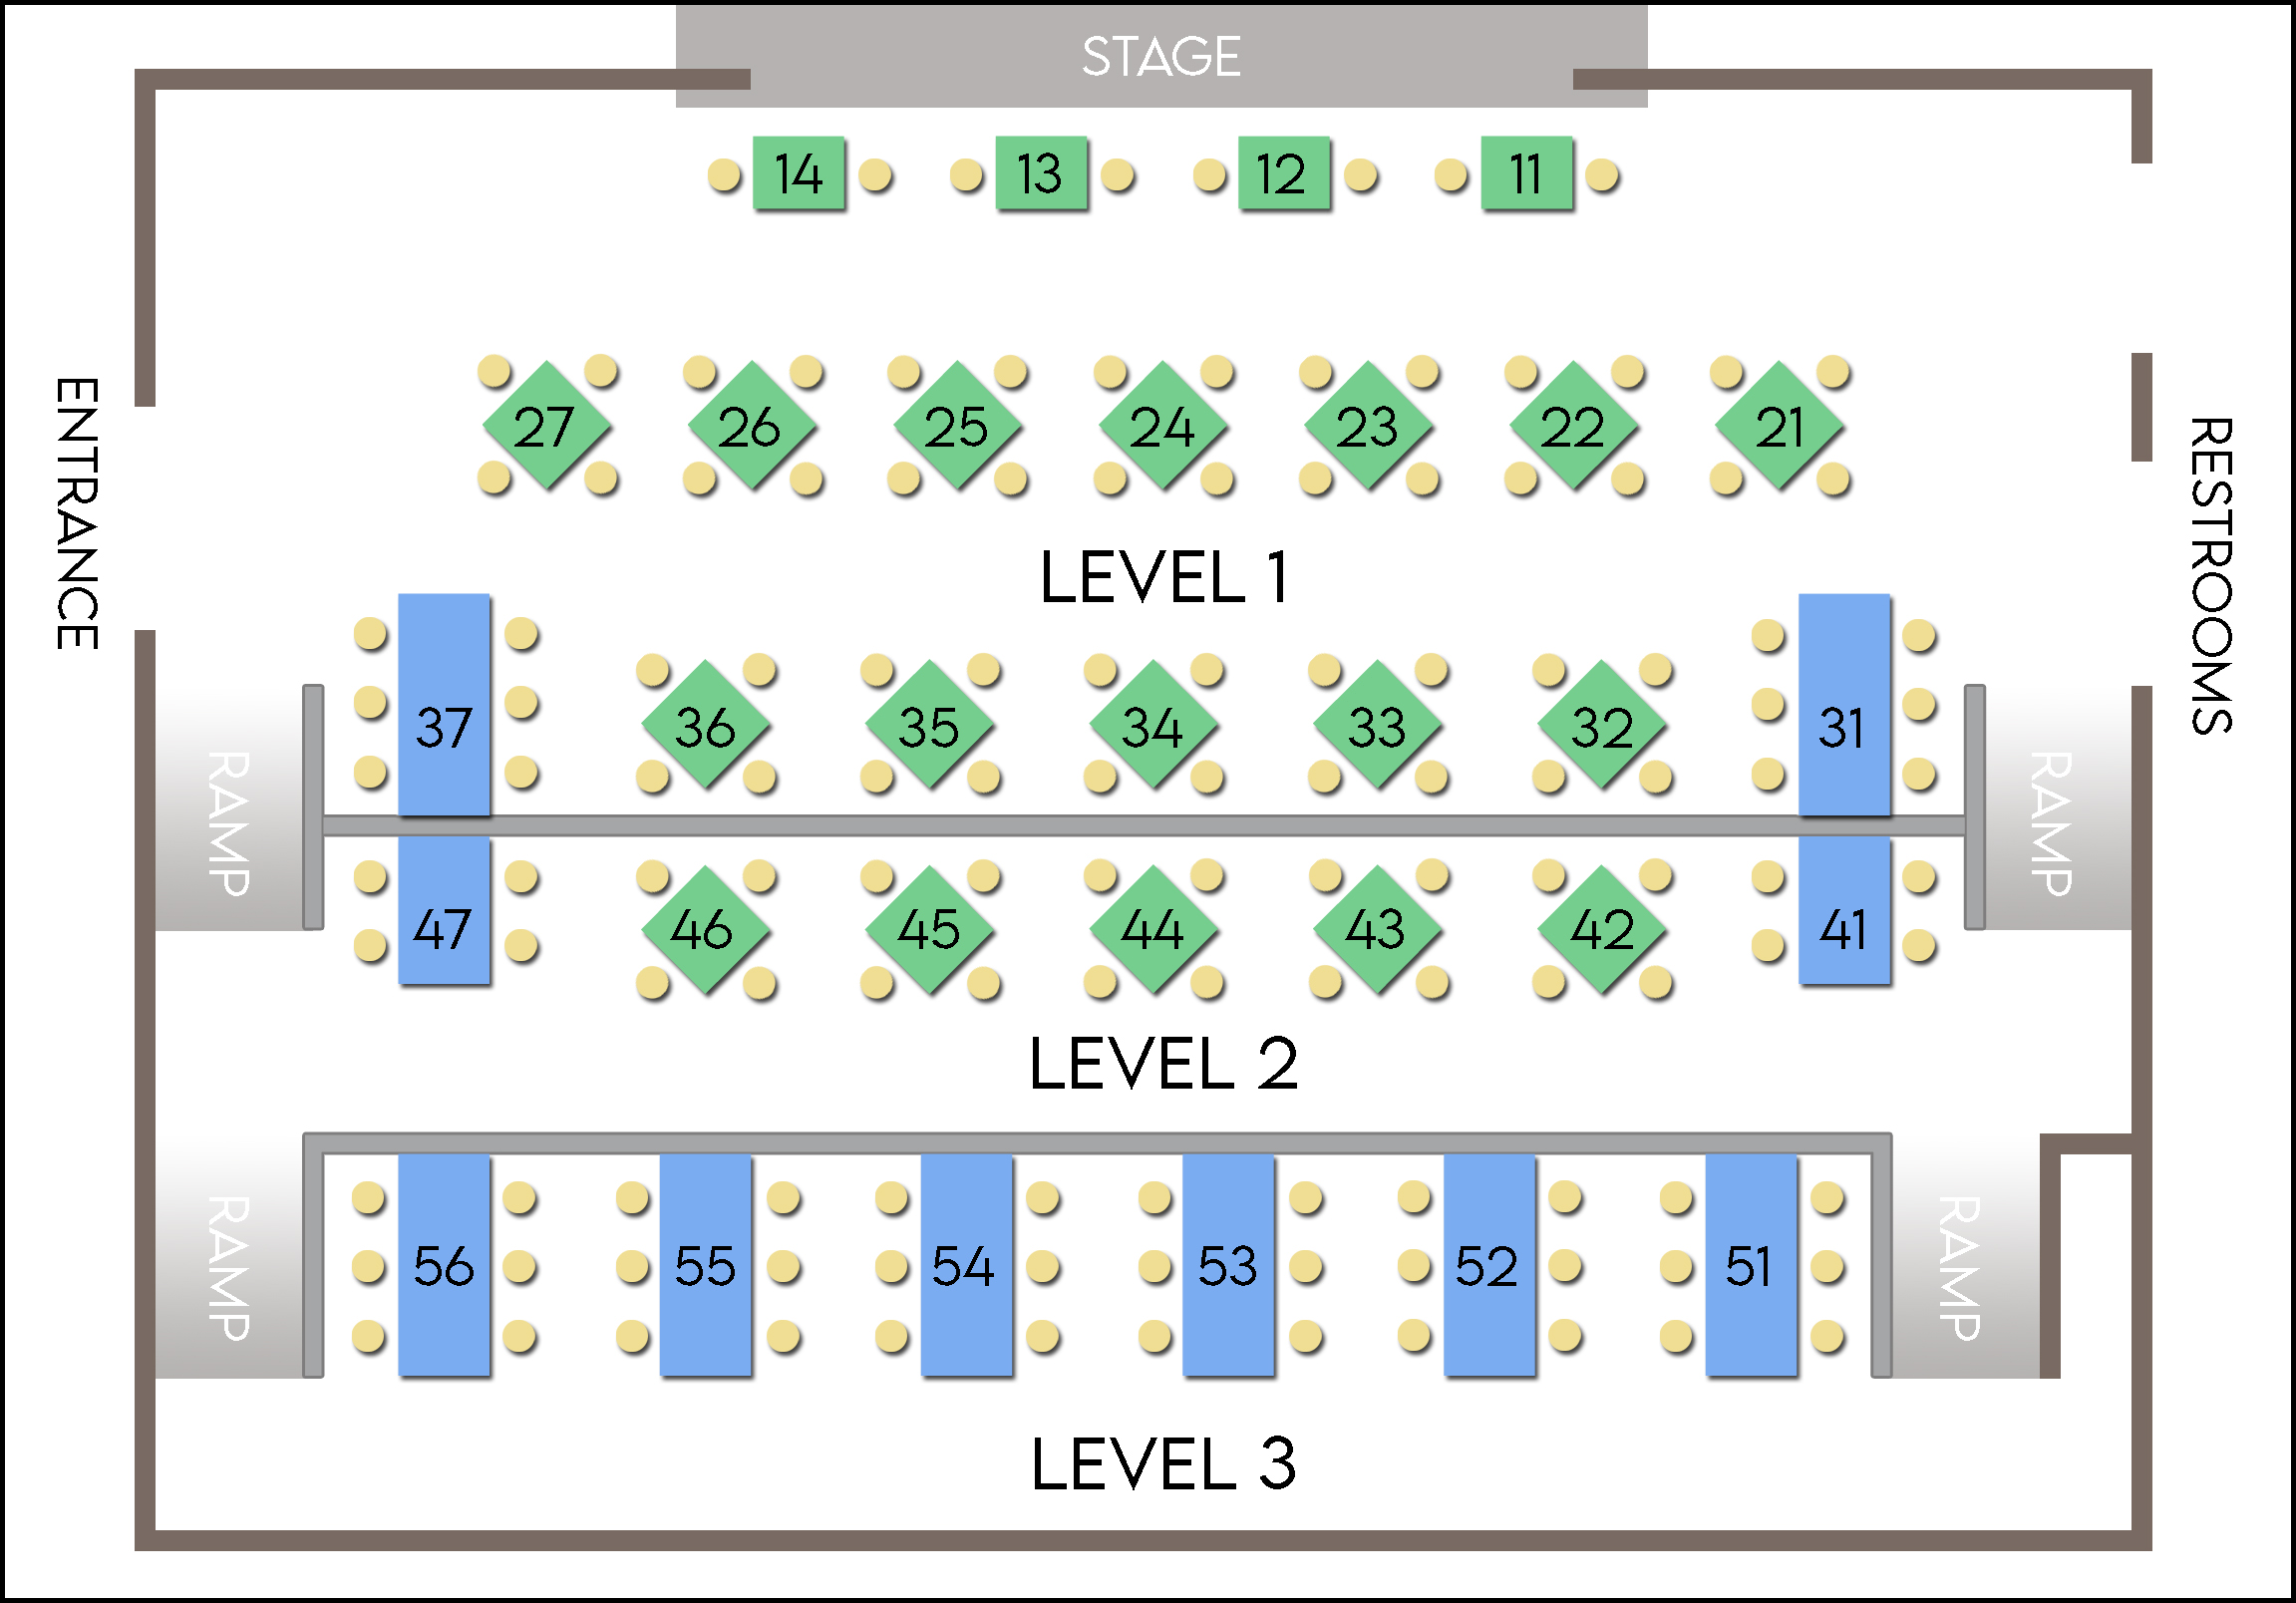 Pines Dinner Theatre seating chart